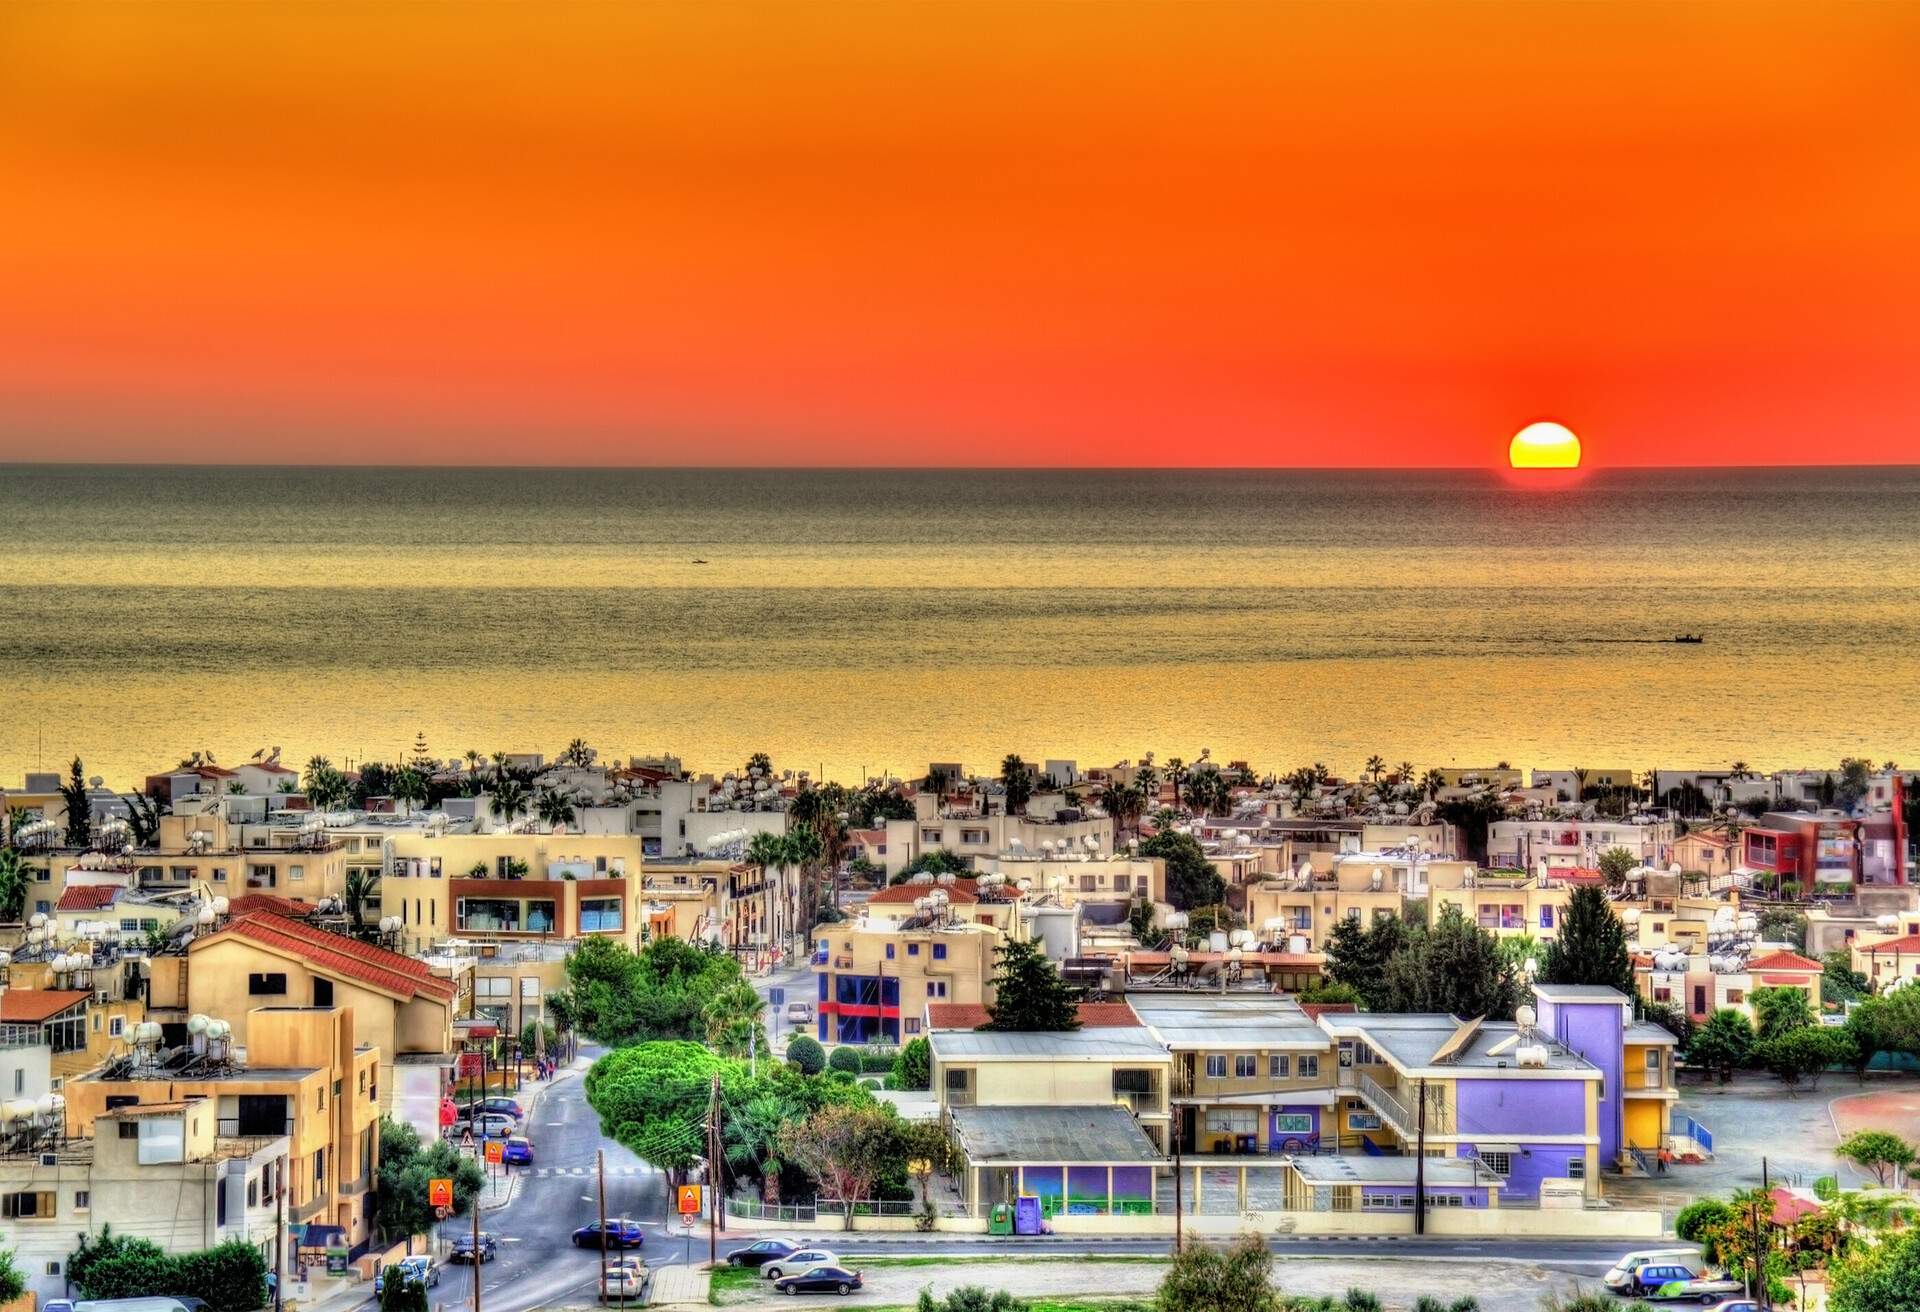 Sunset above the city of Paphos - Cyprus